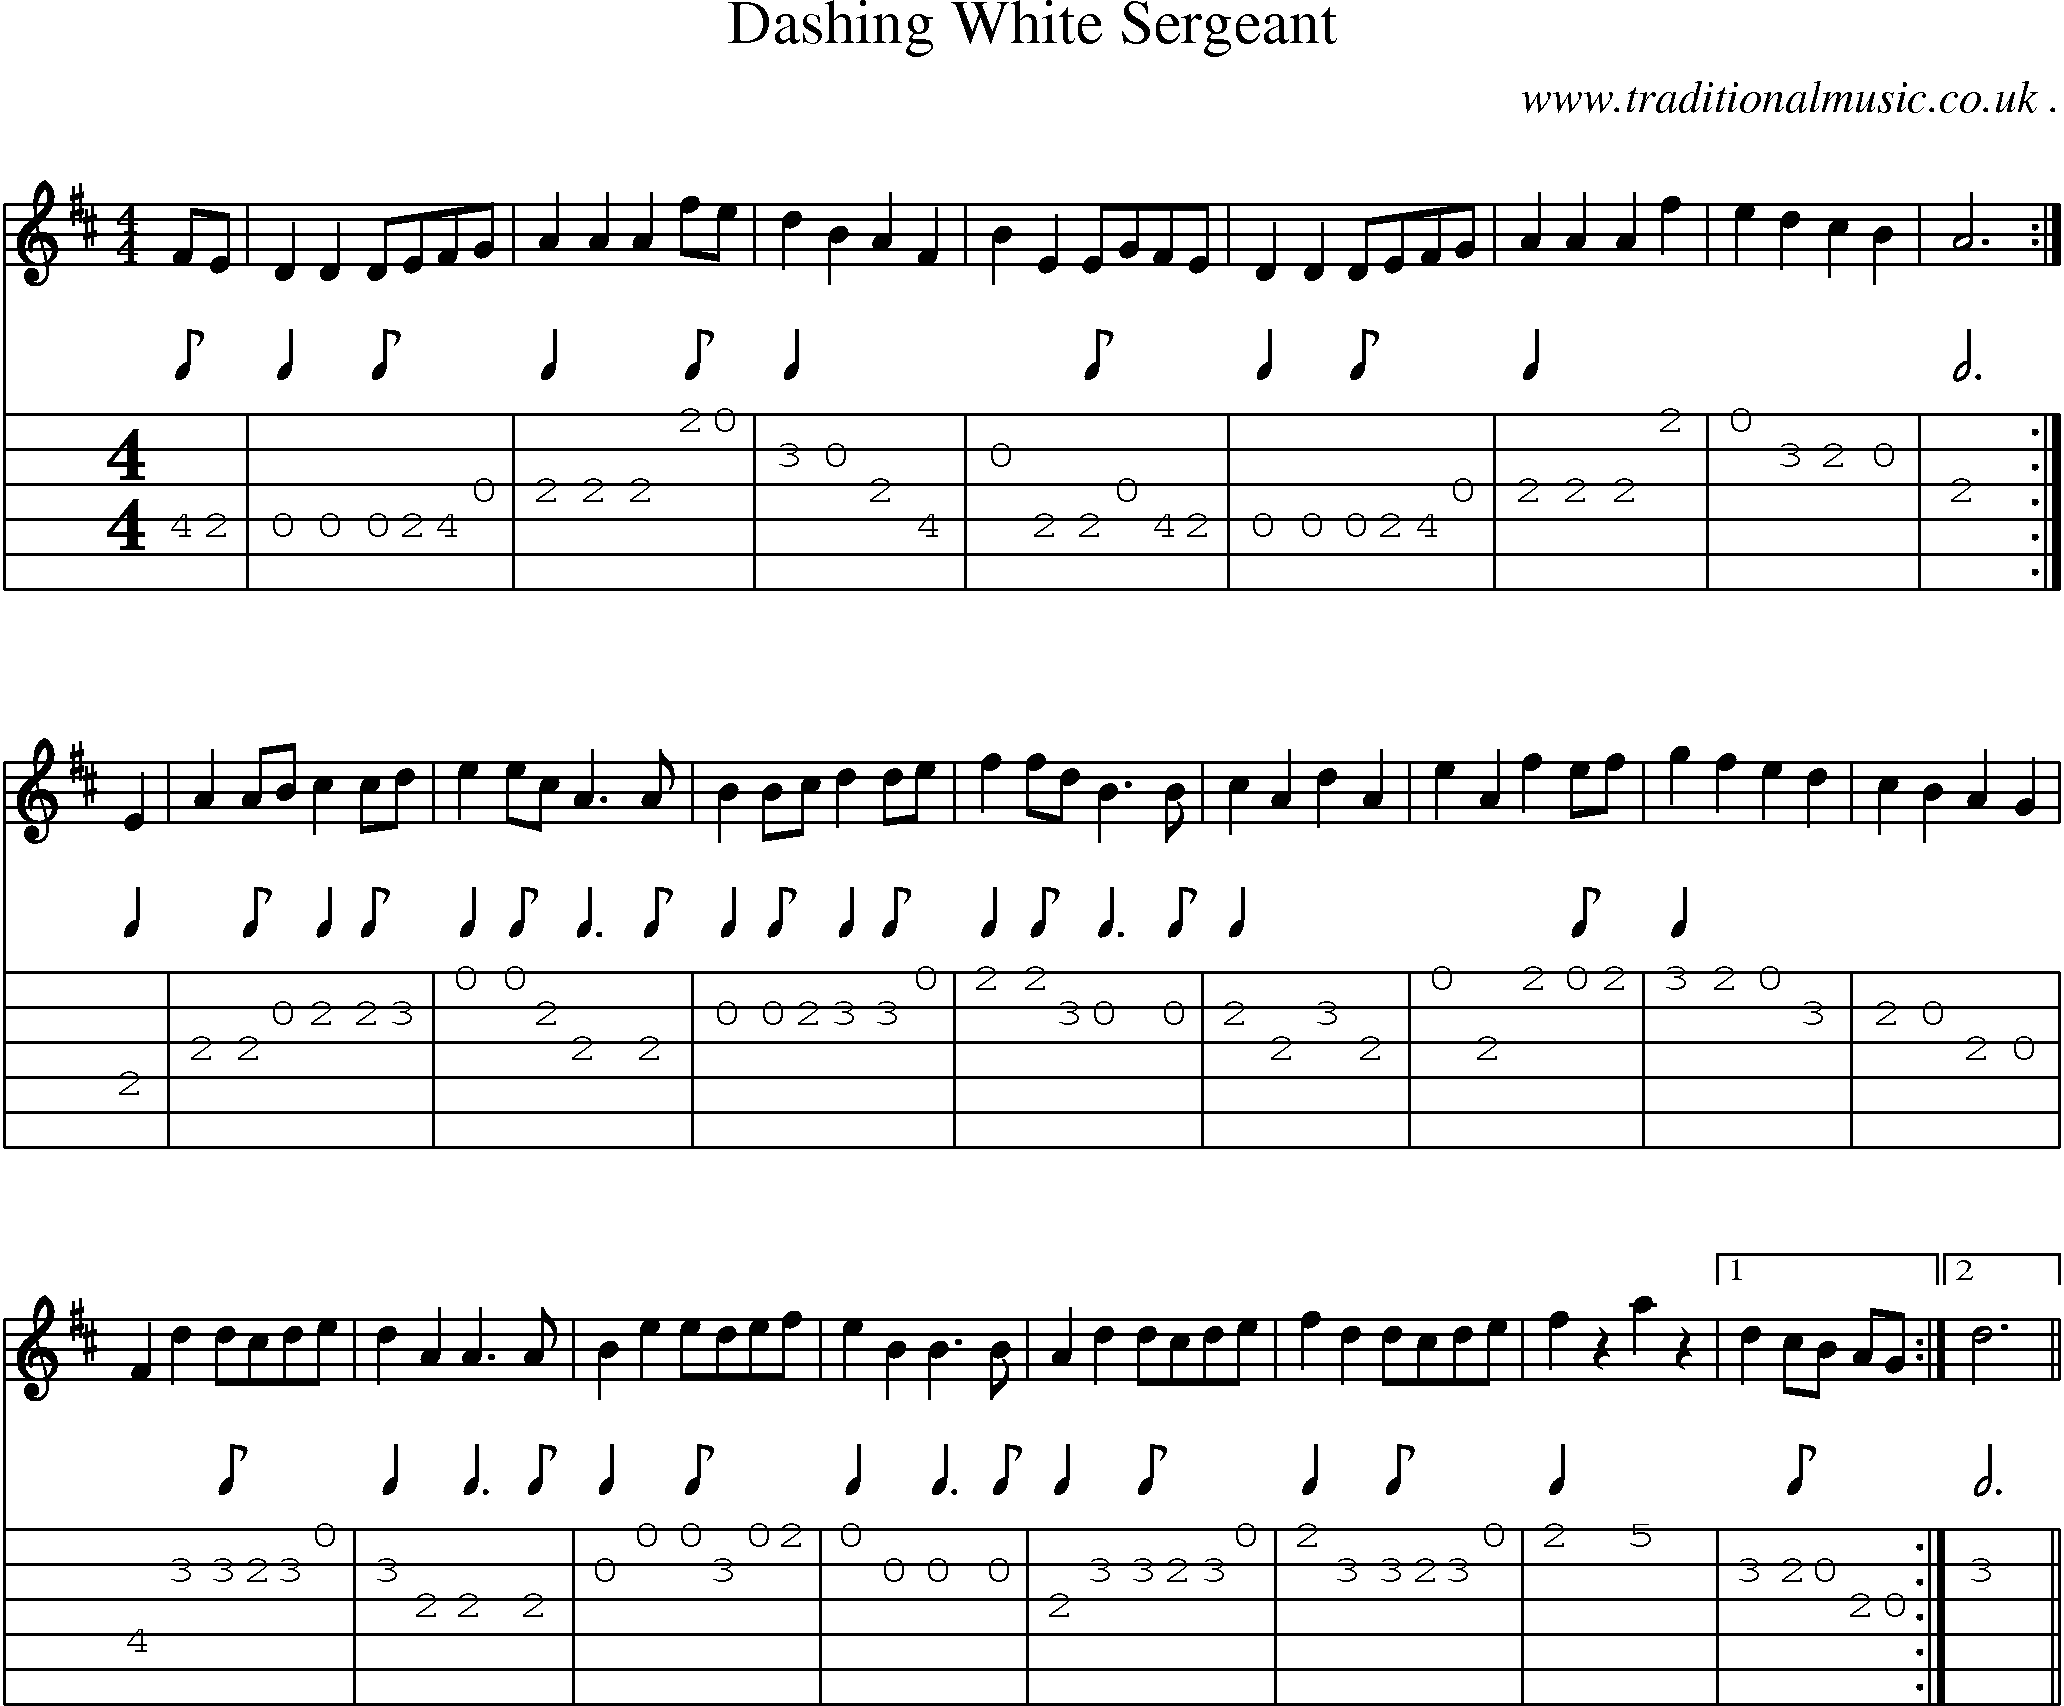 Sheet-music  score, Chords and Guitar Tabs for Dashing White Sergeant